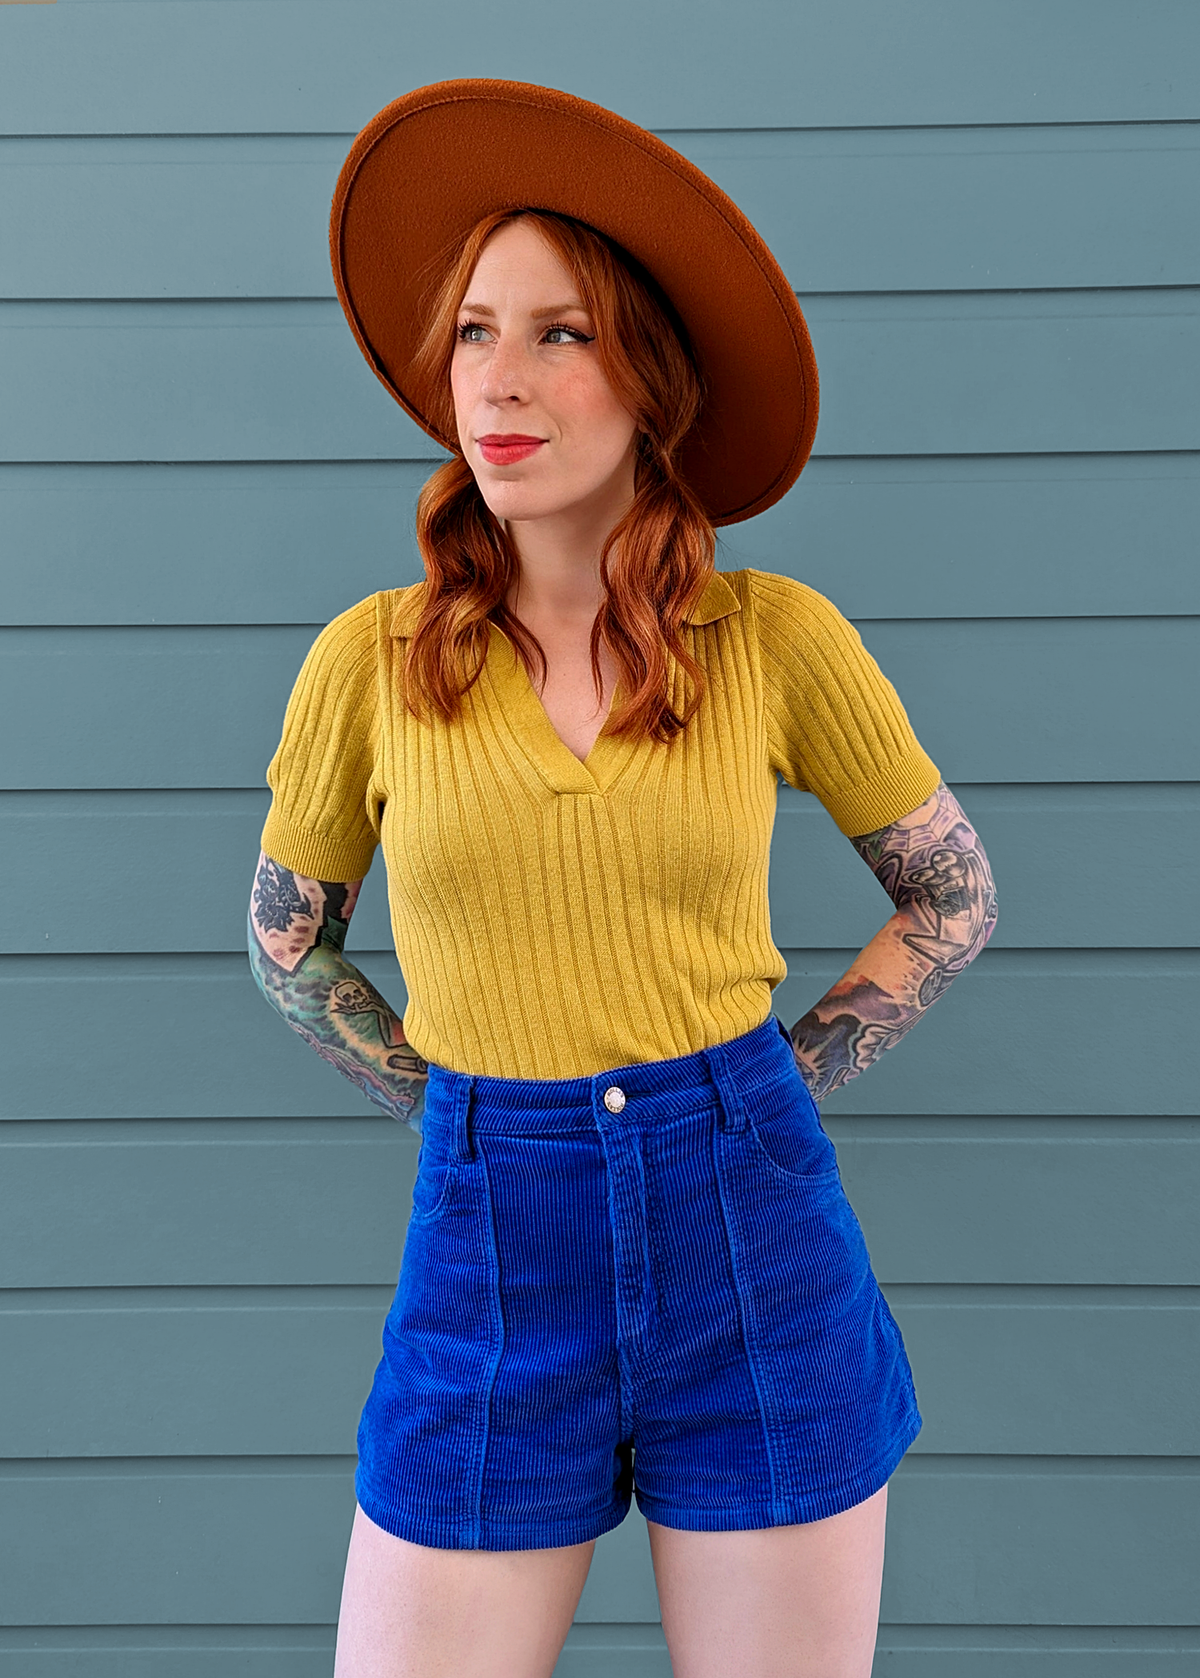 70s inspired electric blue corduroy Dusters shorts with high rise waist by Rolla's Jeans